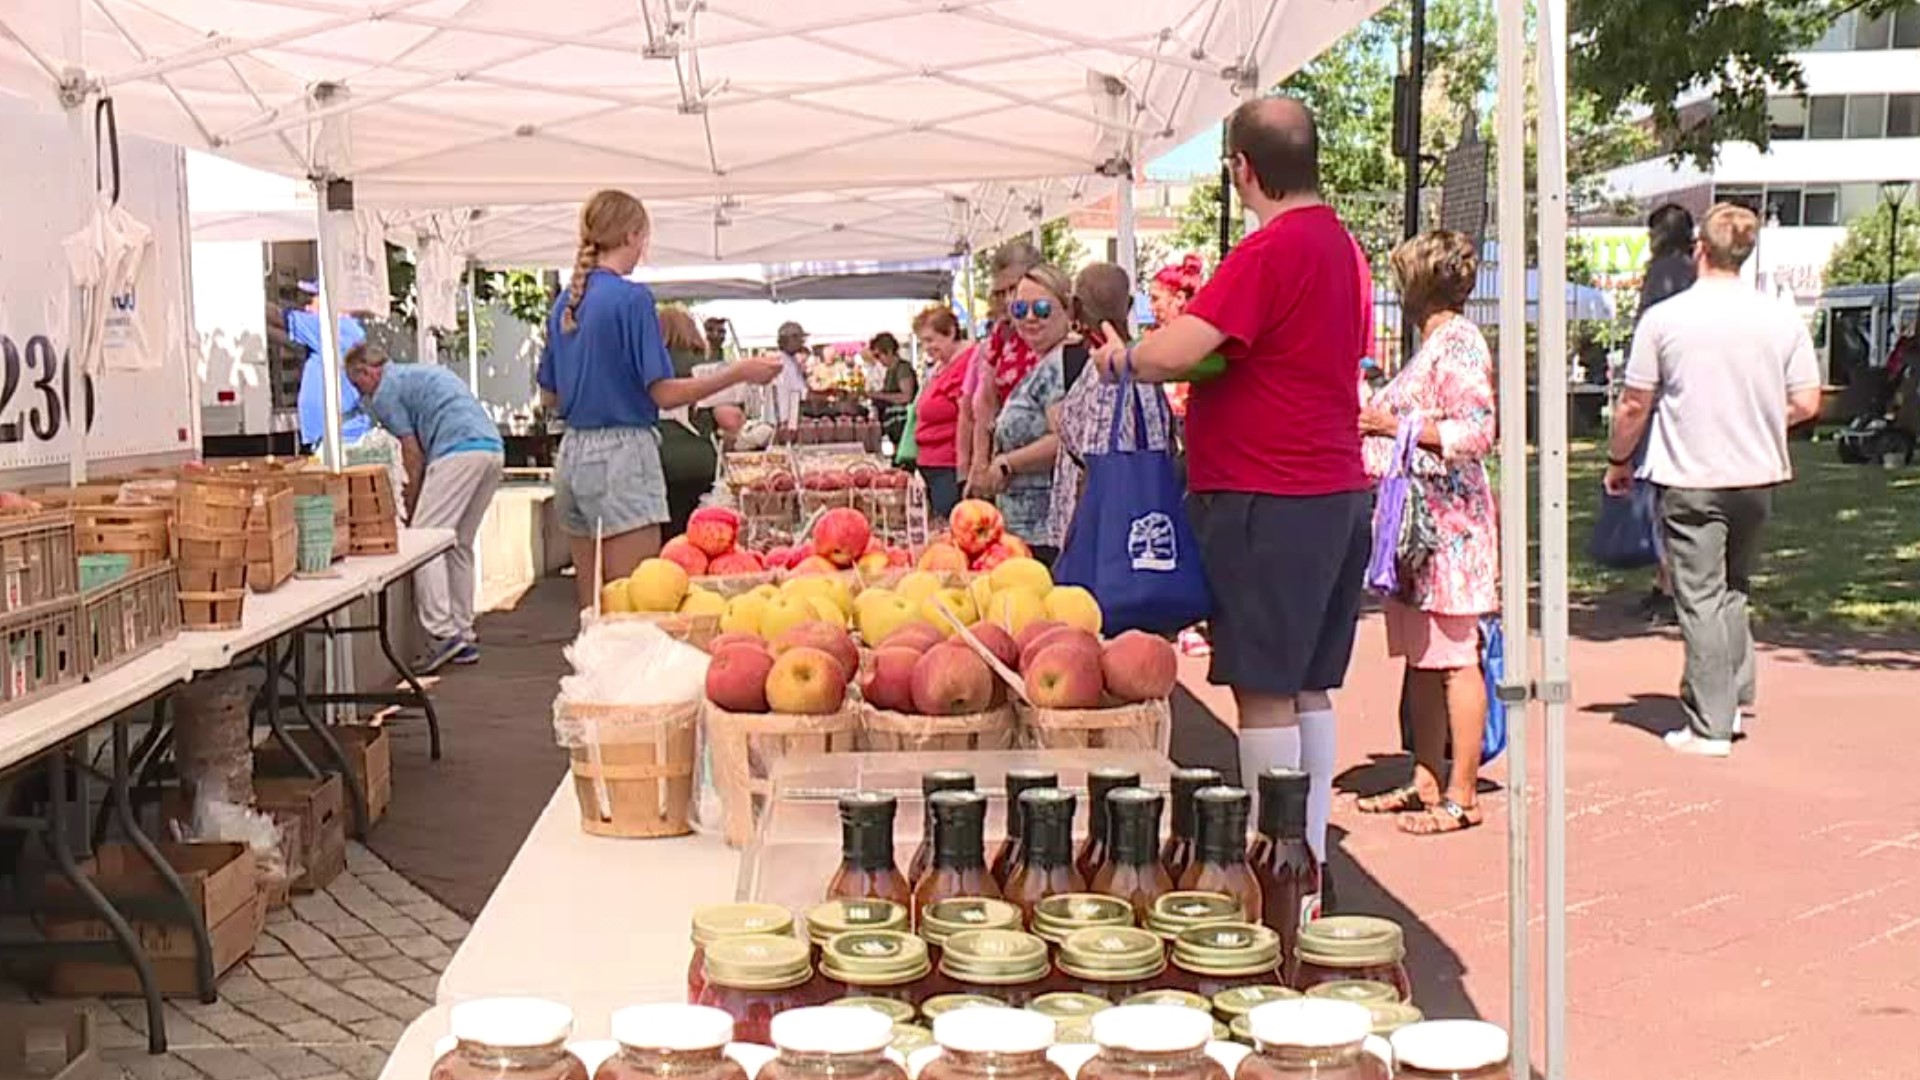 Wilkes-Barre Farmers Market season is here with the first market opened Thursday.